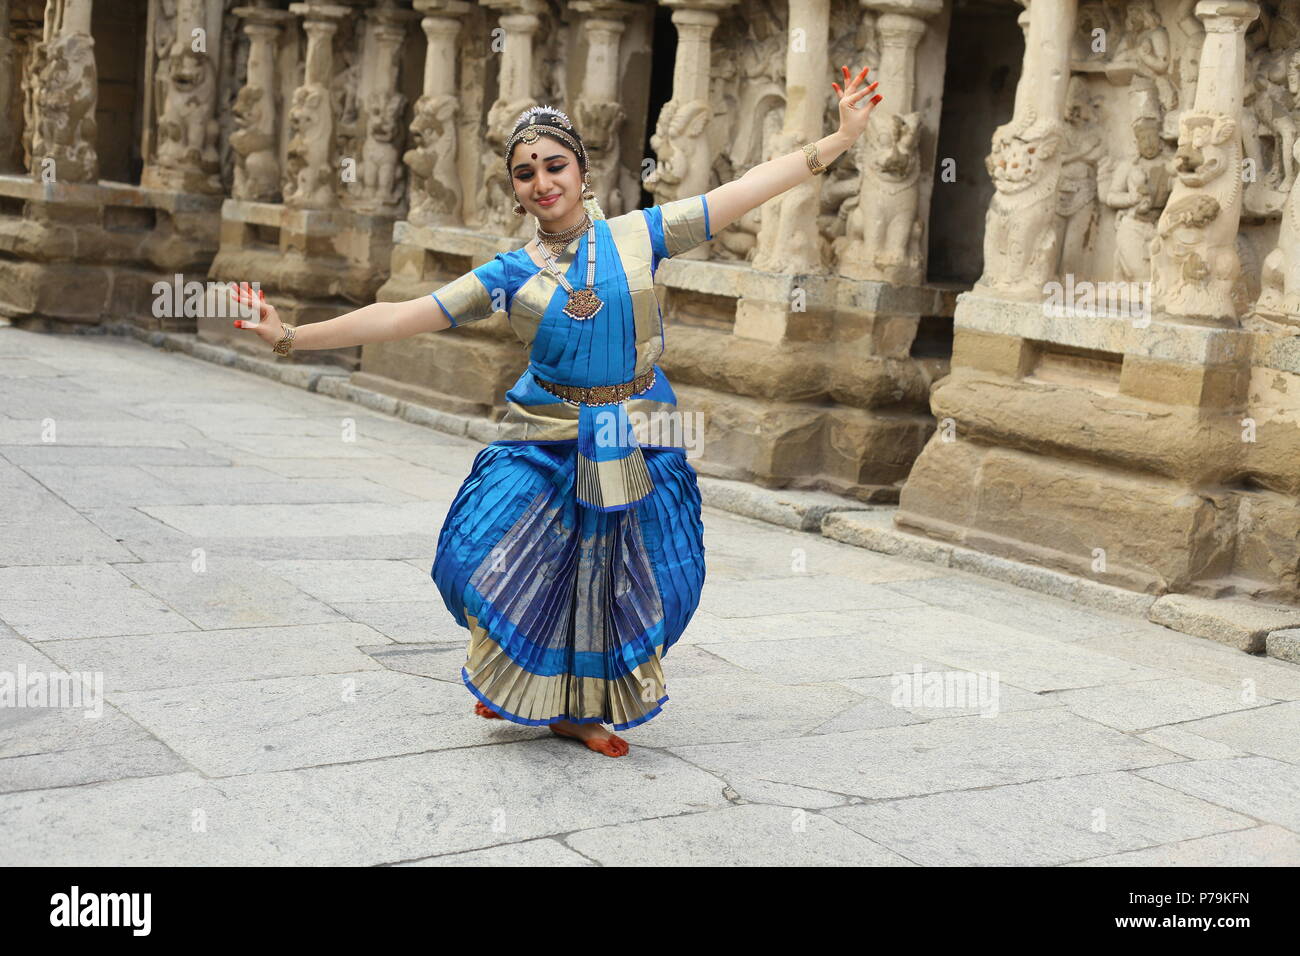 bharatha natyam,one of the eight classical dance forms of india,is from the state of tamil nadu.here the dancer performs before temples with sculpture Stock Photo